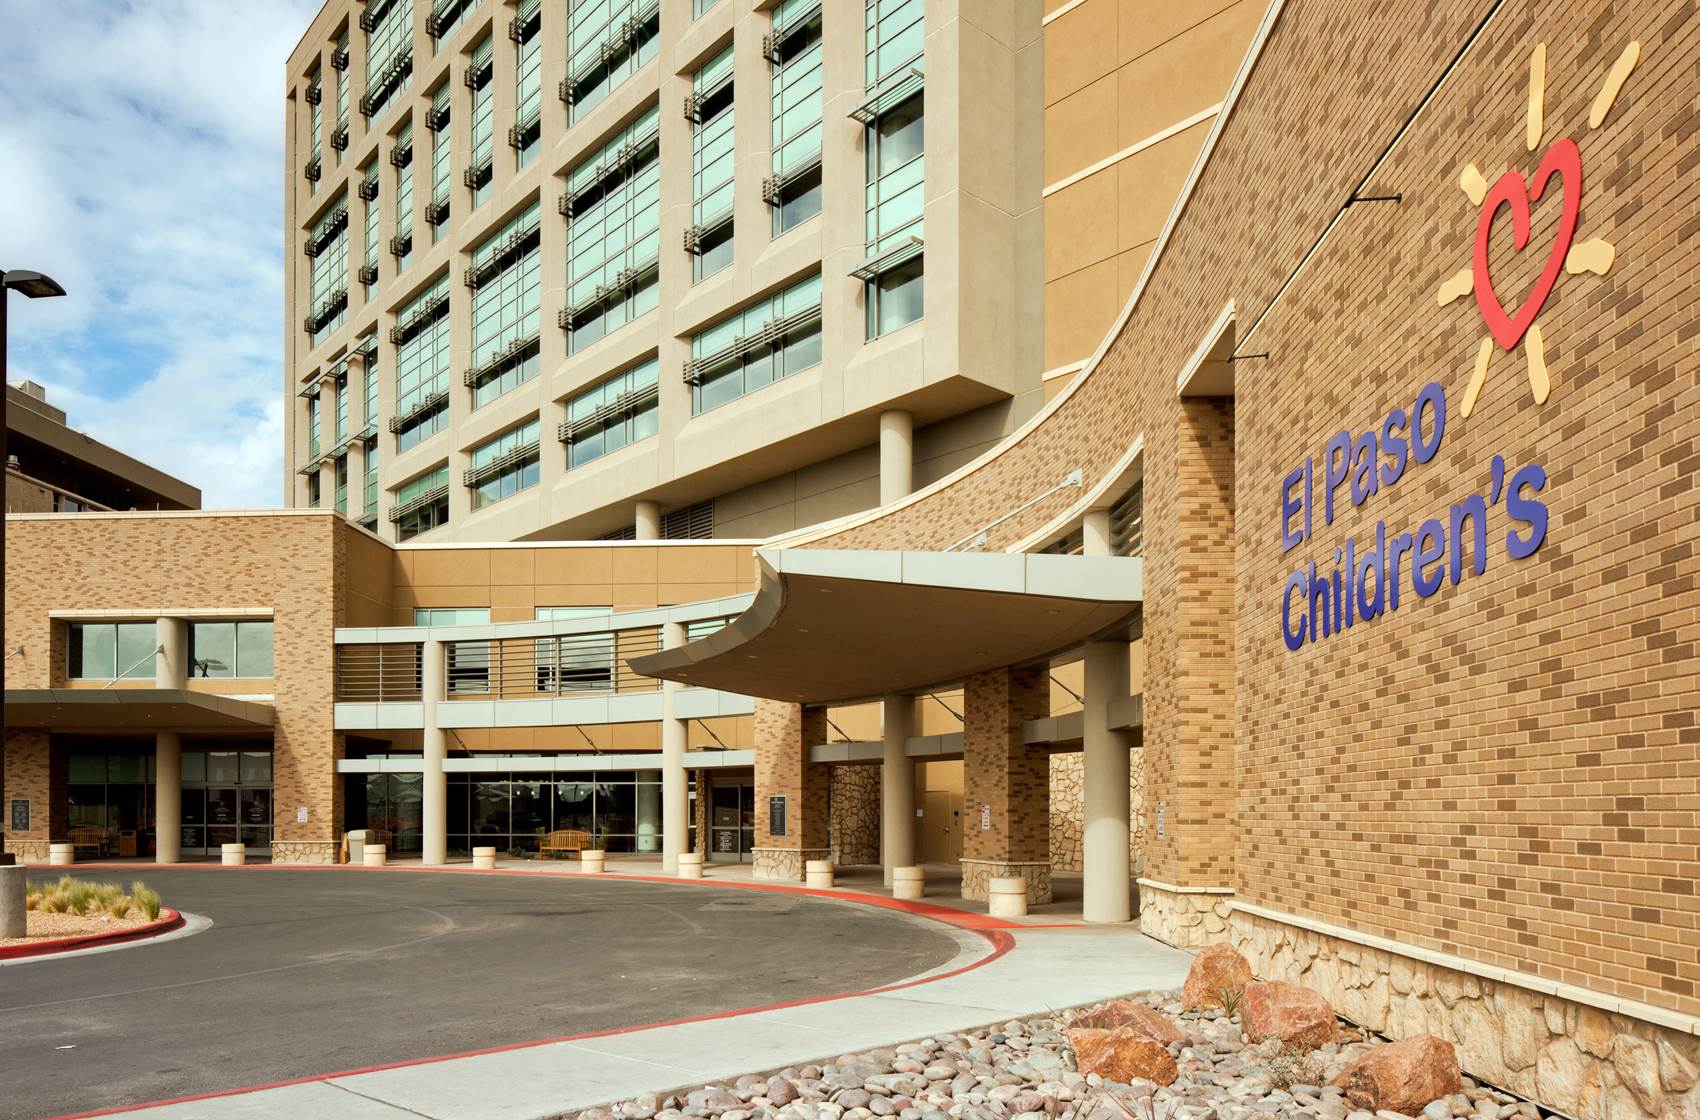 Entrance to the University Medical Center of El Paso